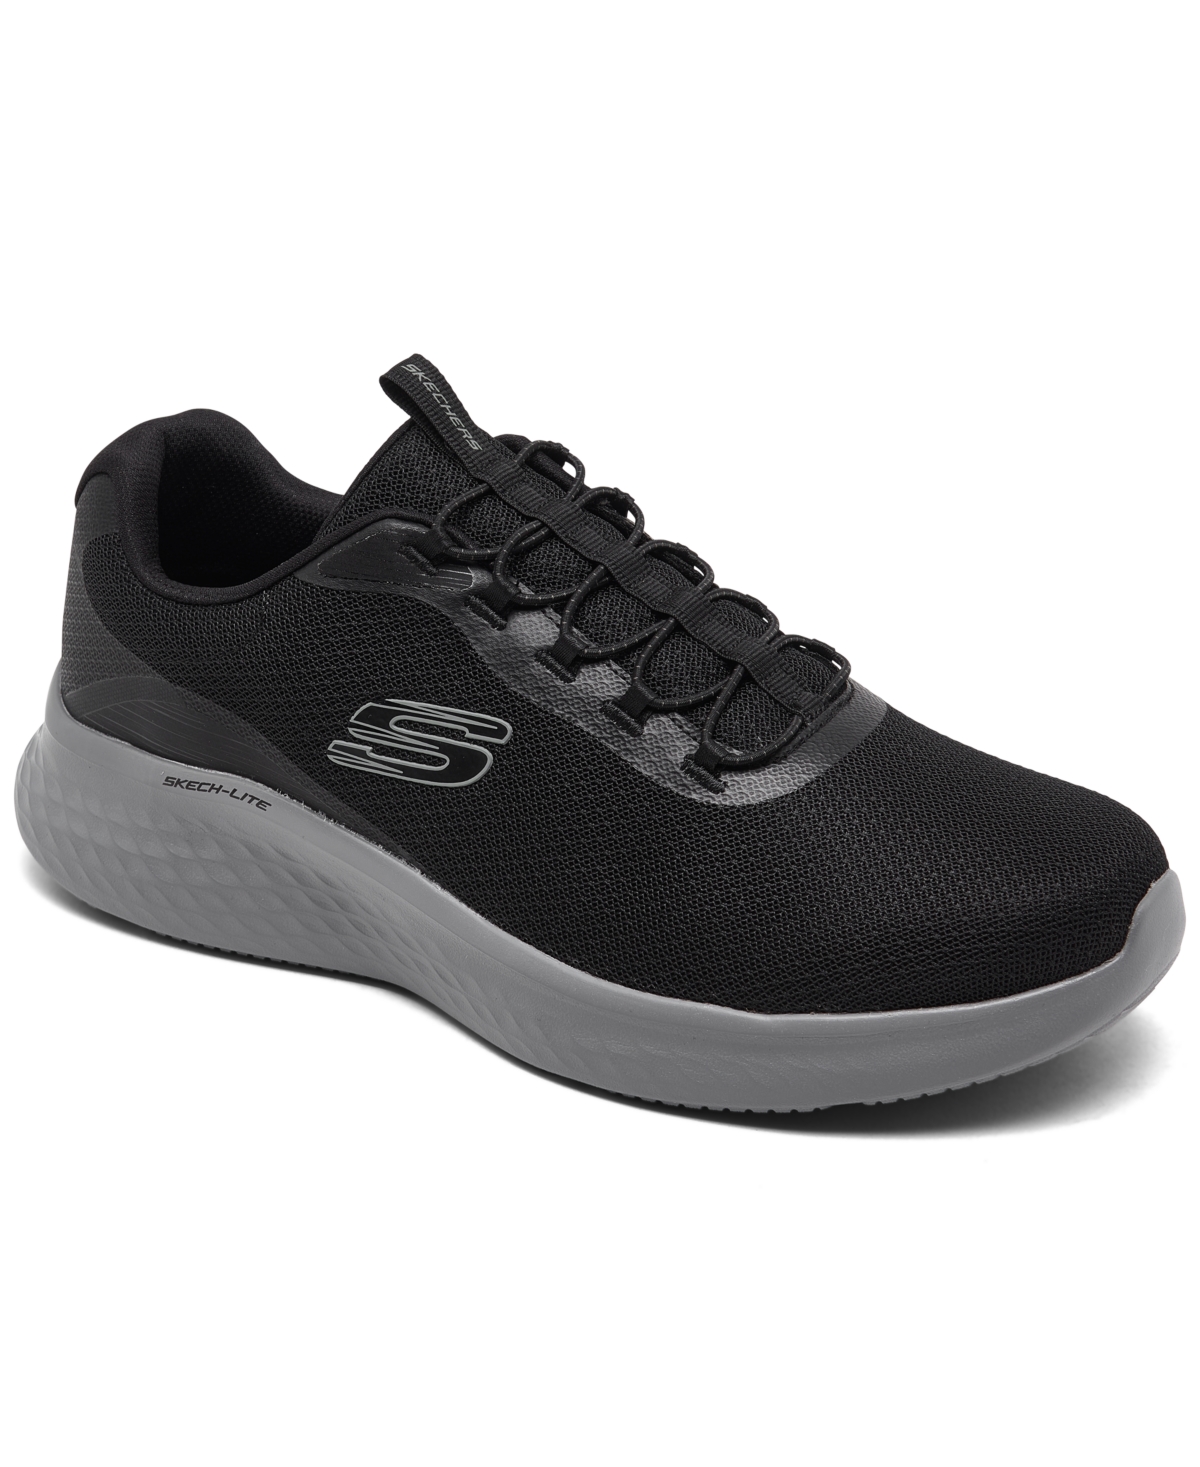 Men's Skech-Lite Pro - Frenner Casual Sneakers from Finish Line - Black/Charcoal